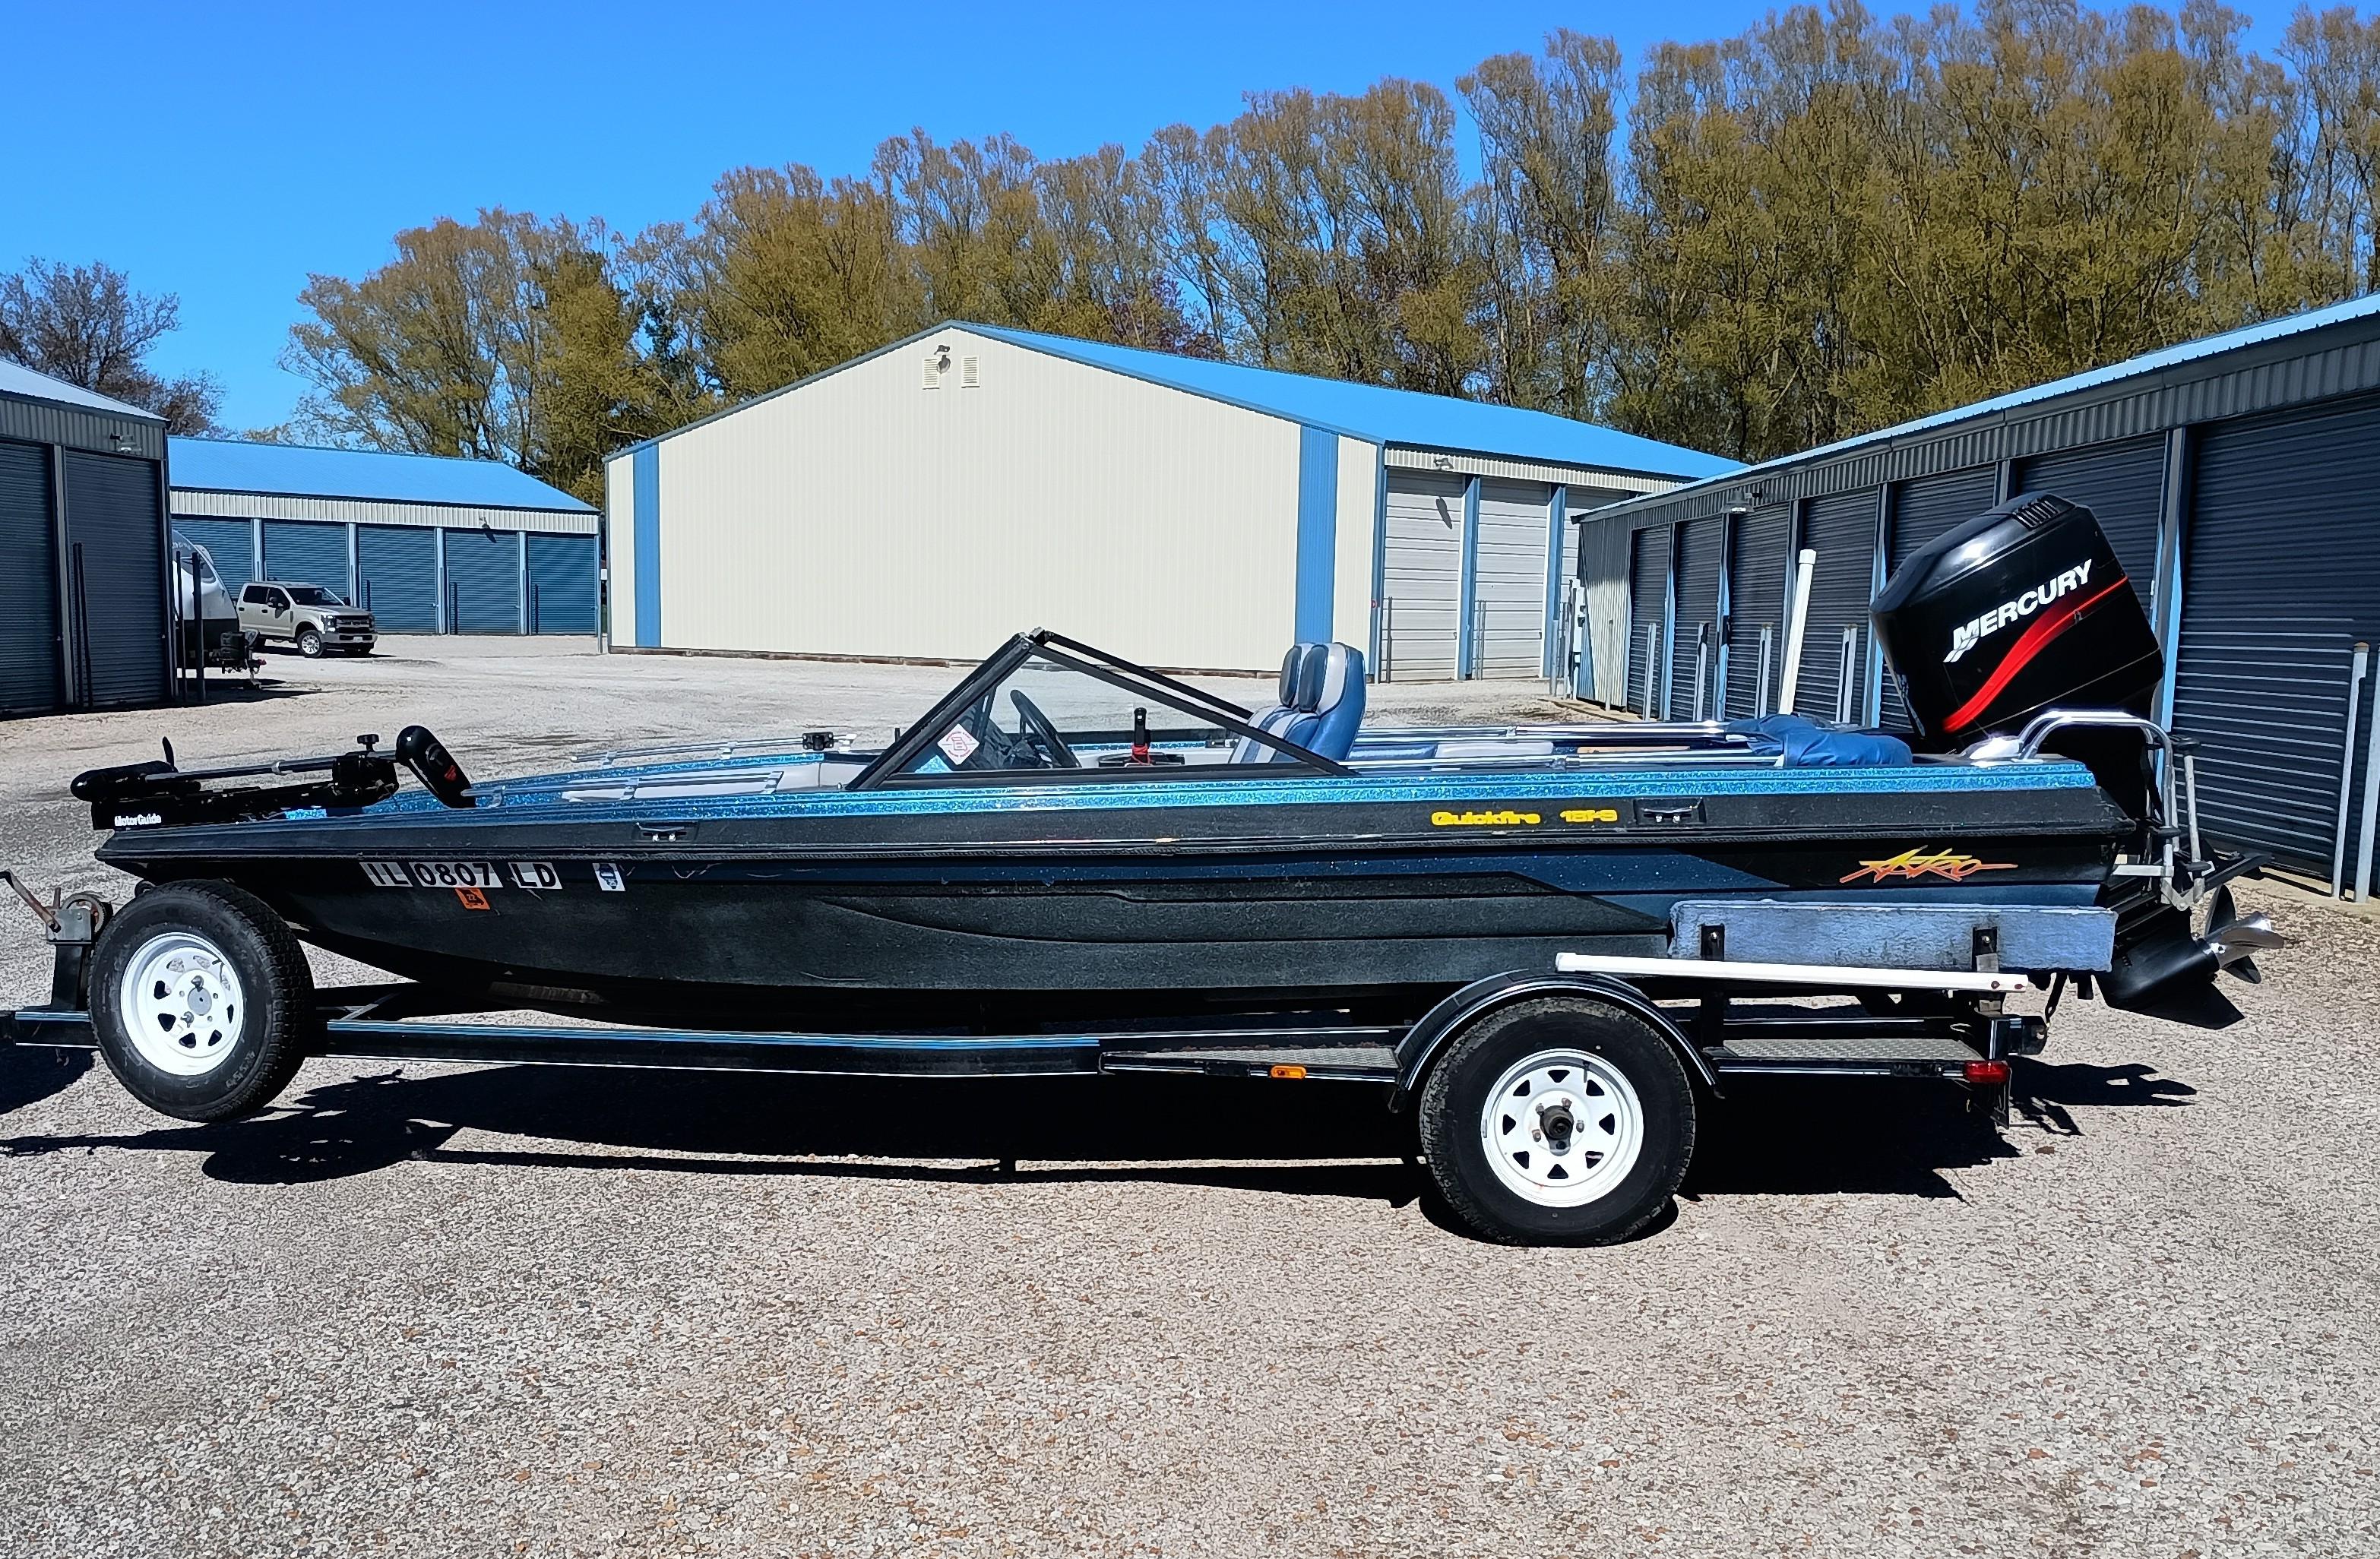 Astro boats for sale - Boat Trader